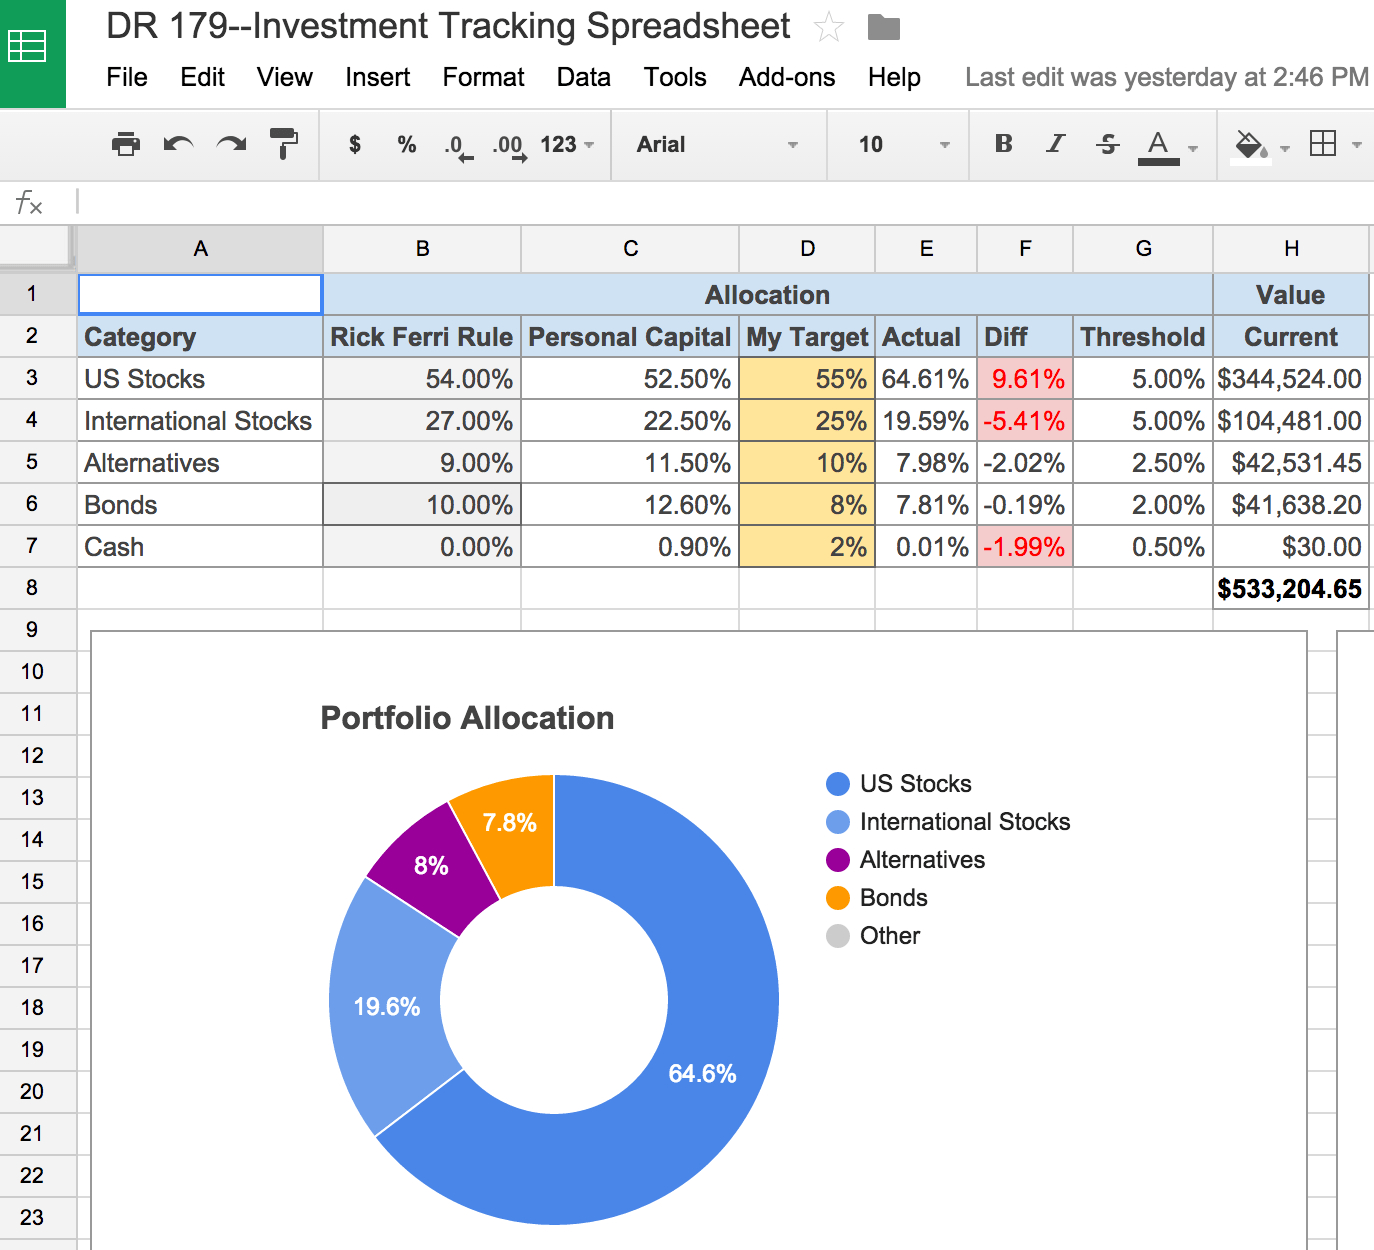 Free Online Investment Stock Portfolio Tracker Spreadsheet Pertaining To An Awesome And Free Investment Tracking Spreadsheet